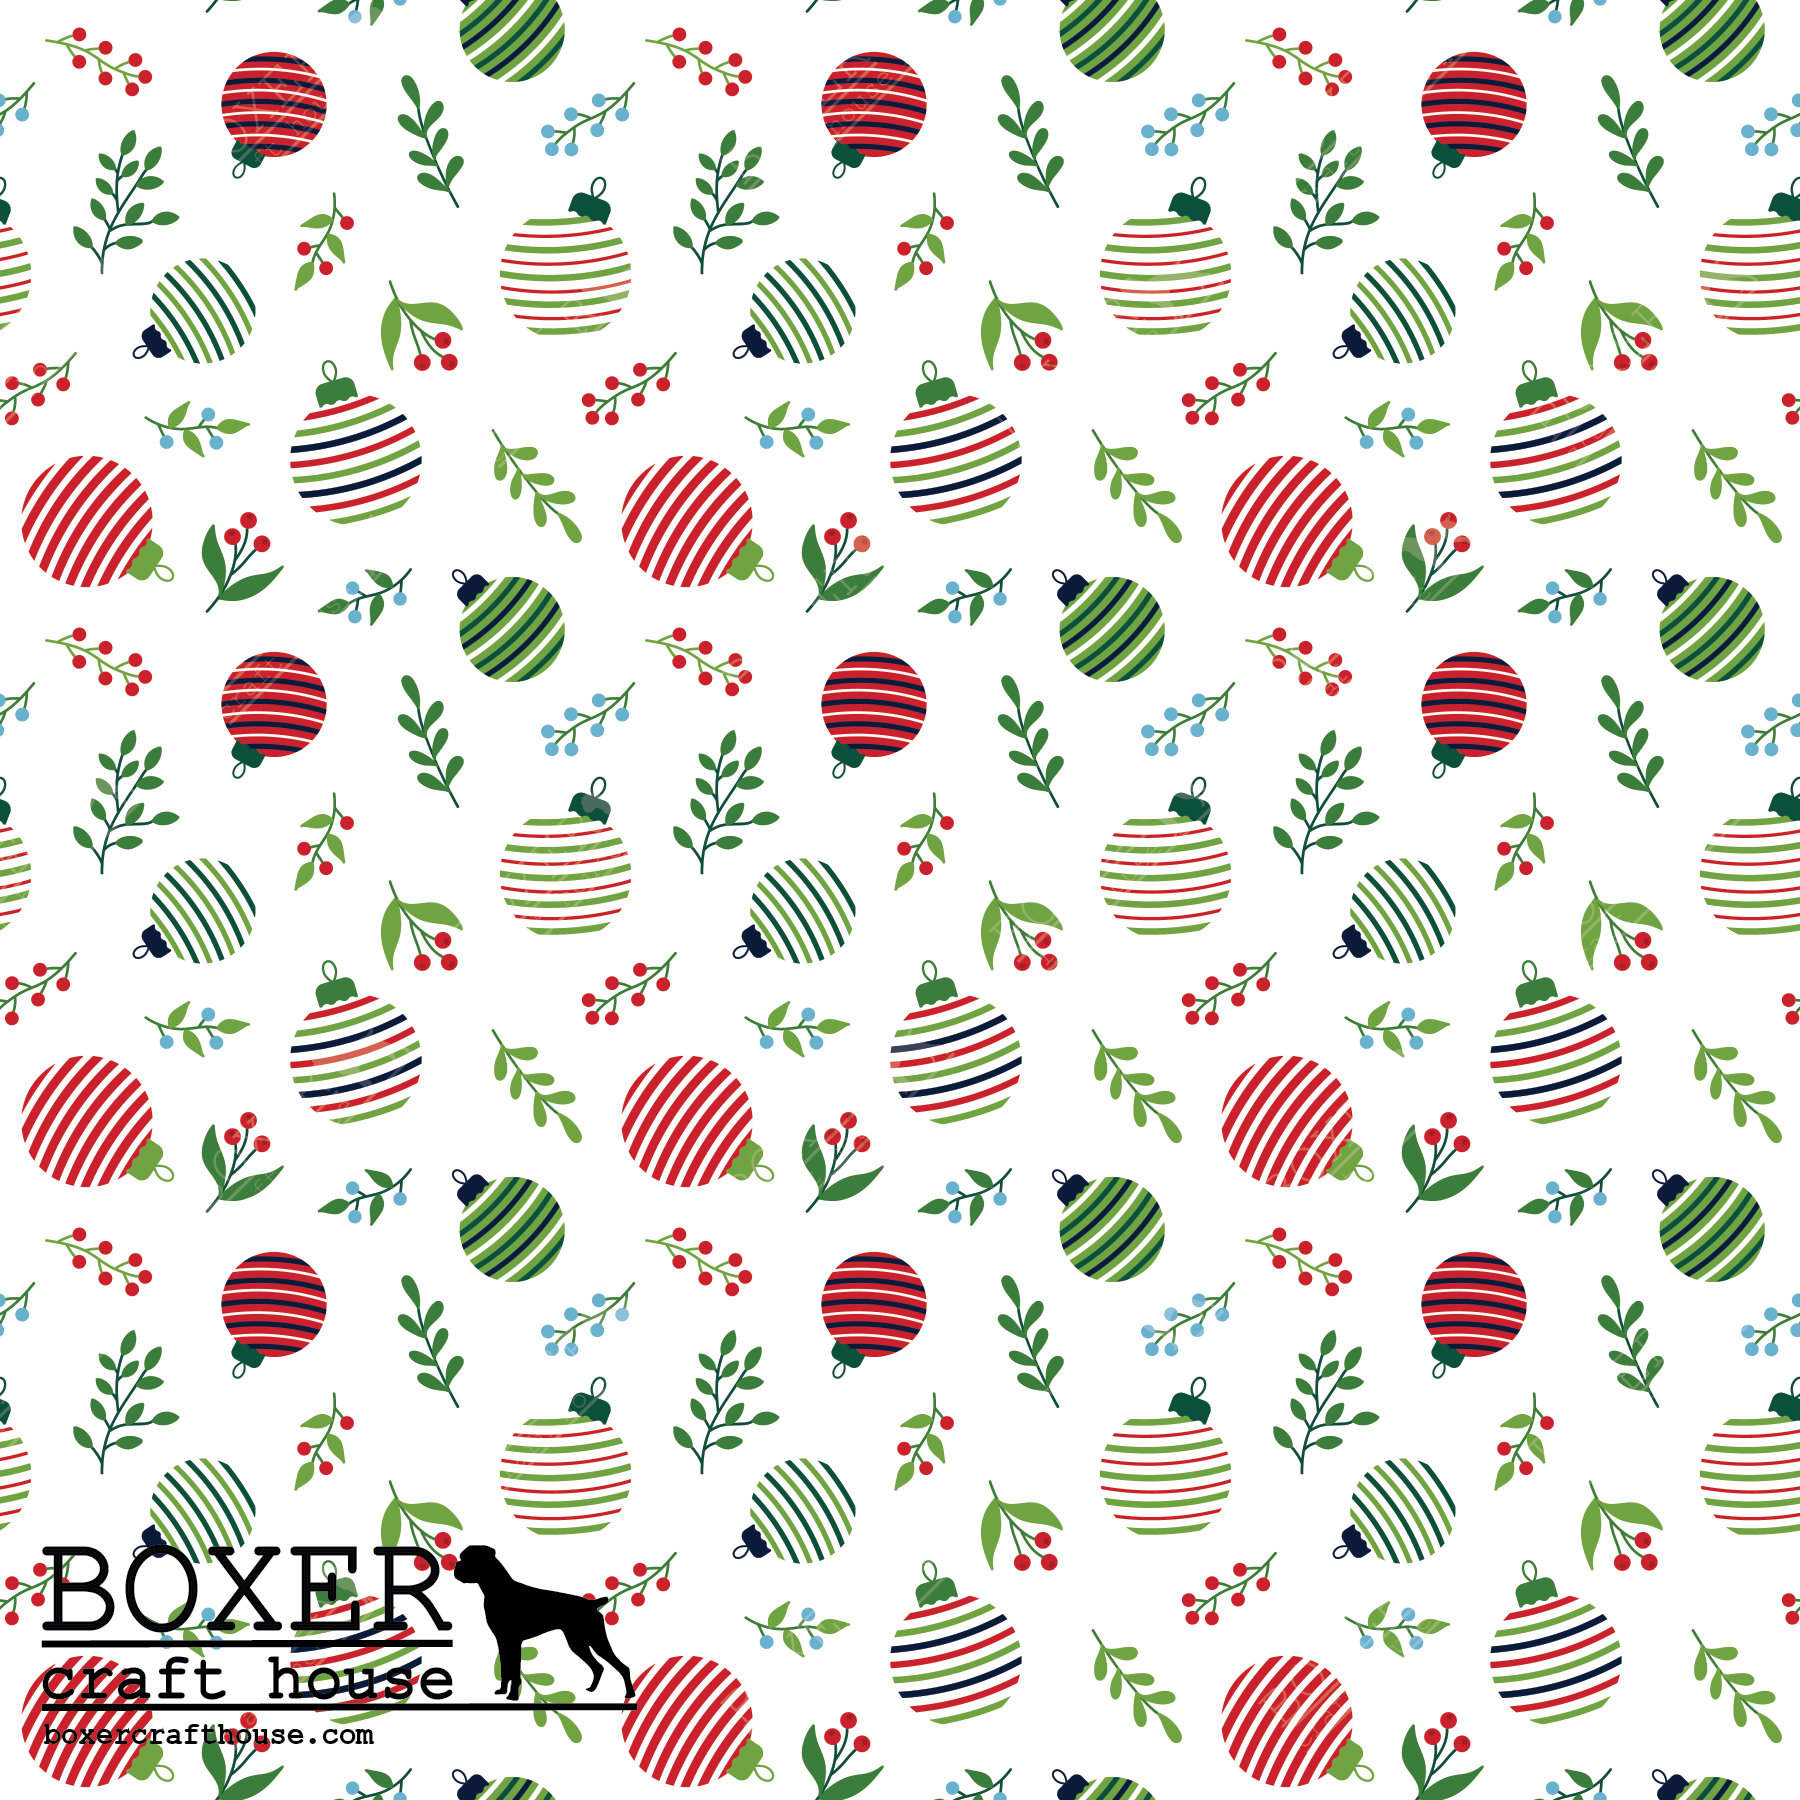 Christmas Lights Faux Leather, Holiday Cheer, Printed Faux Leather, Boxer Craft House, Embroidery Vinyl, Christmas Embroidery Vinyl, Applique Vinyl, Craft Vinyl, Christmas Time, Holiday, Bag making faux leather,